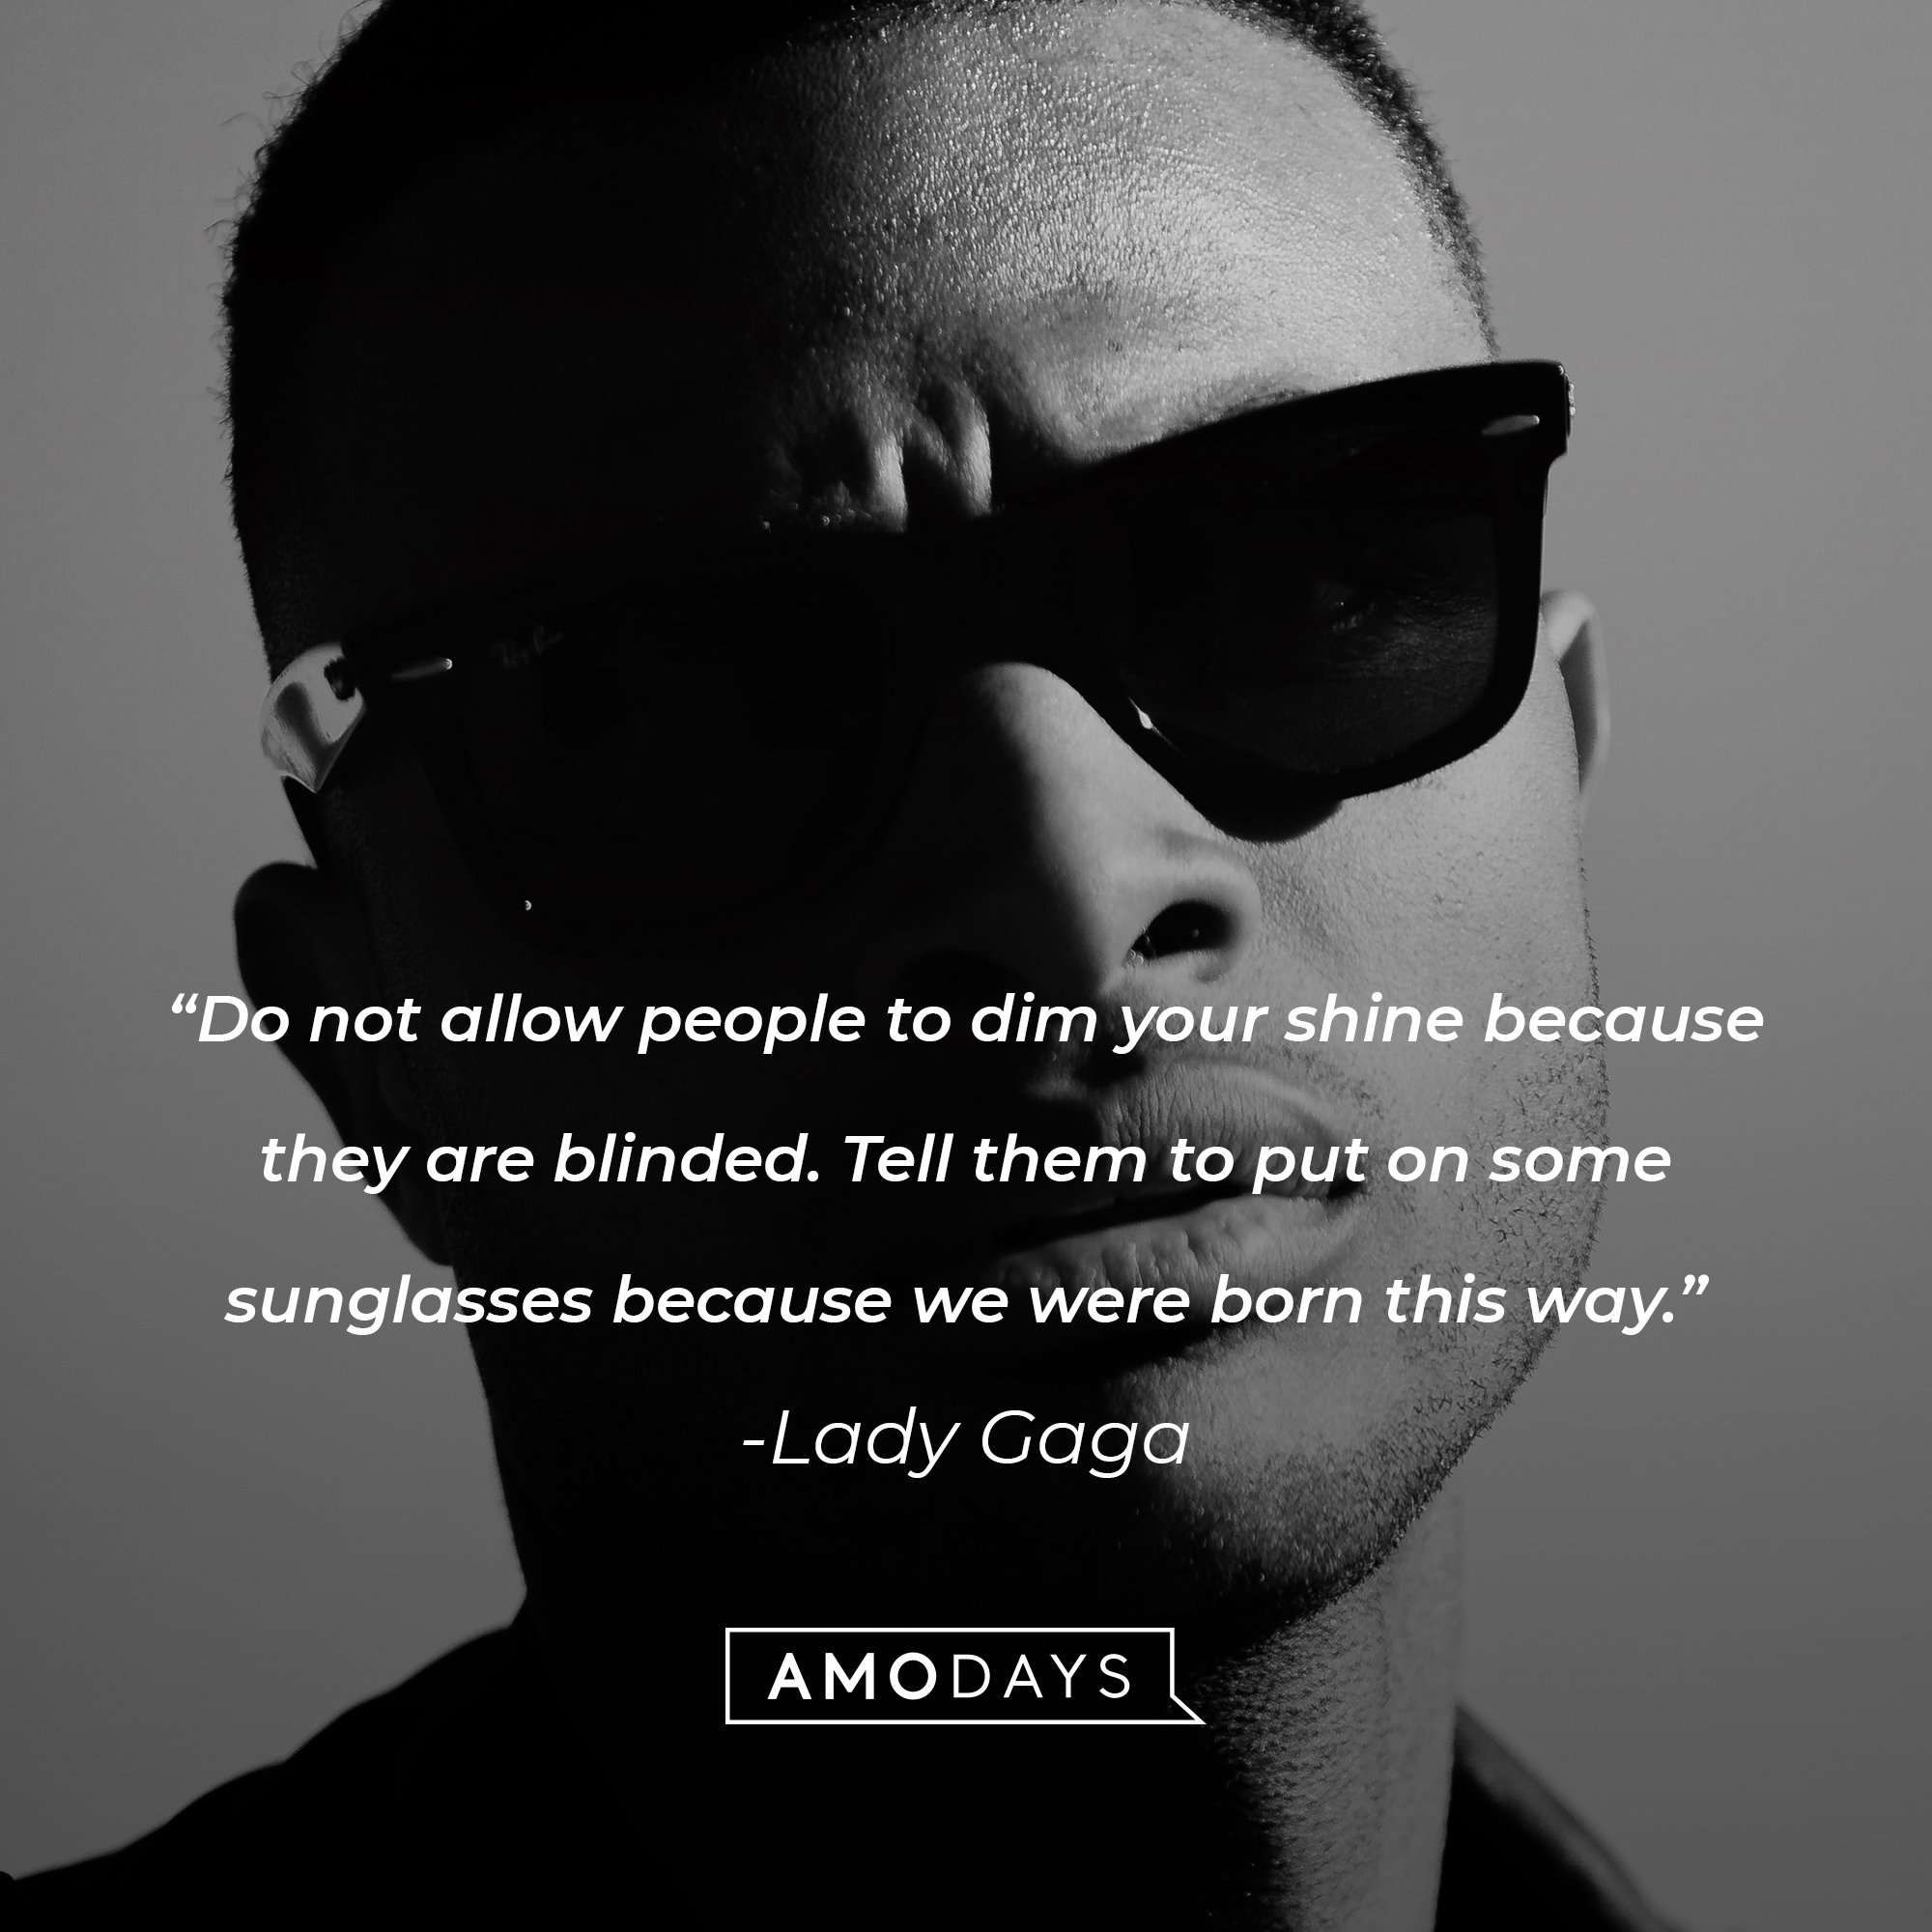 Lady Gaga’s quote: "Do not allow people to dim your shine because they are blinded. Tell them to put on some sunglasses because we were born this way." | Image: AmoDays 